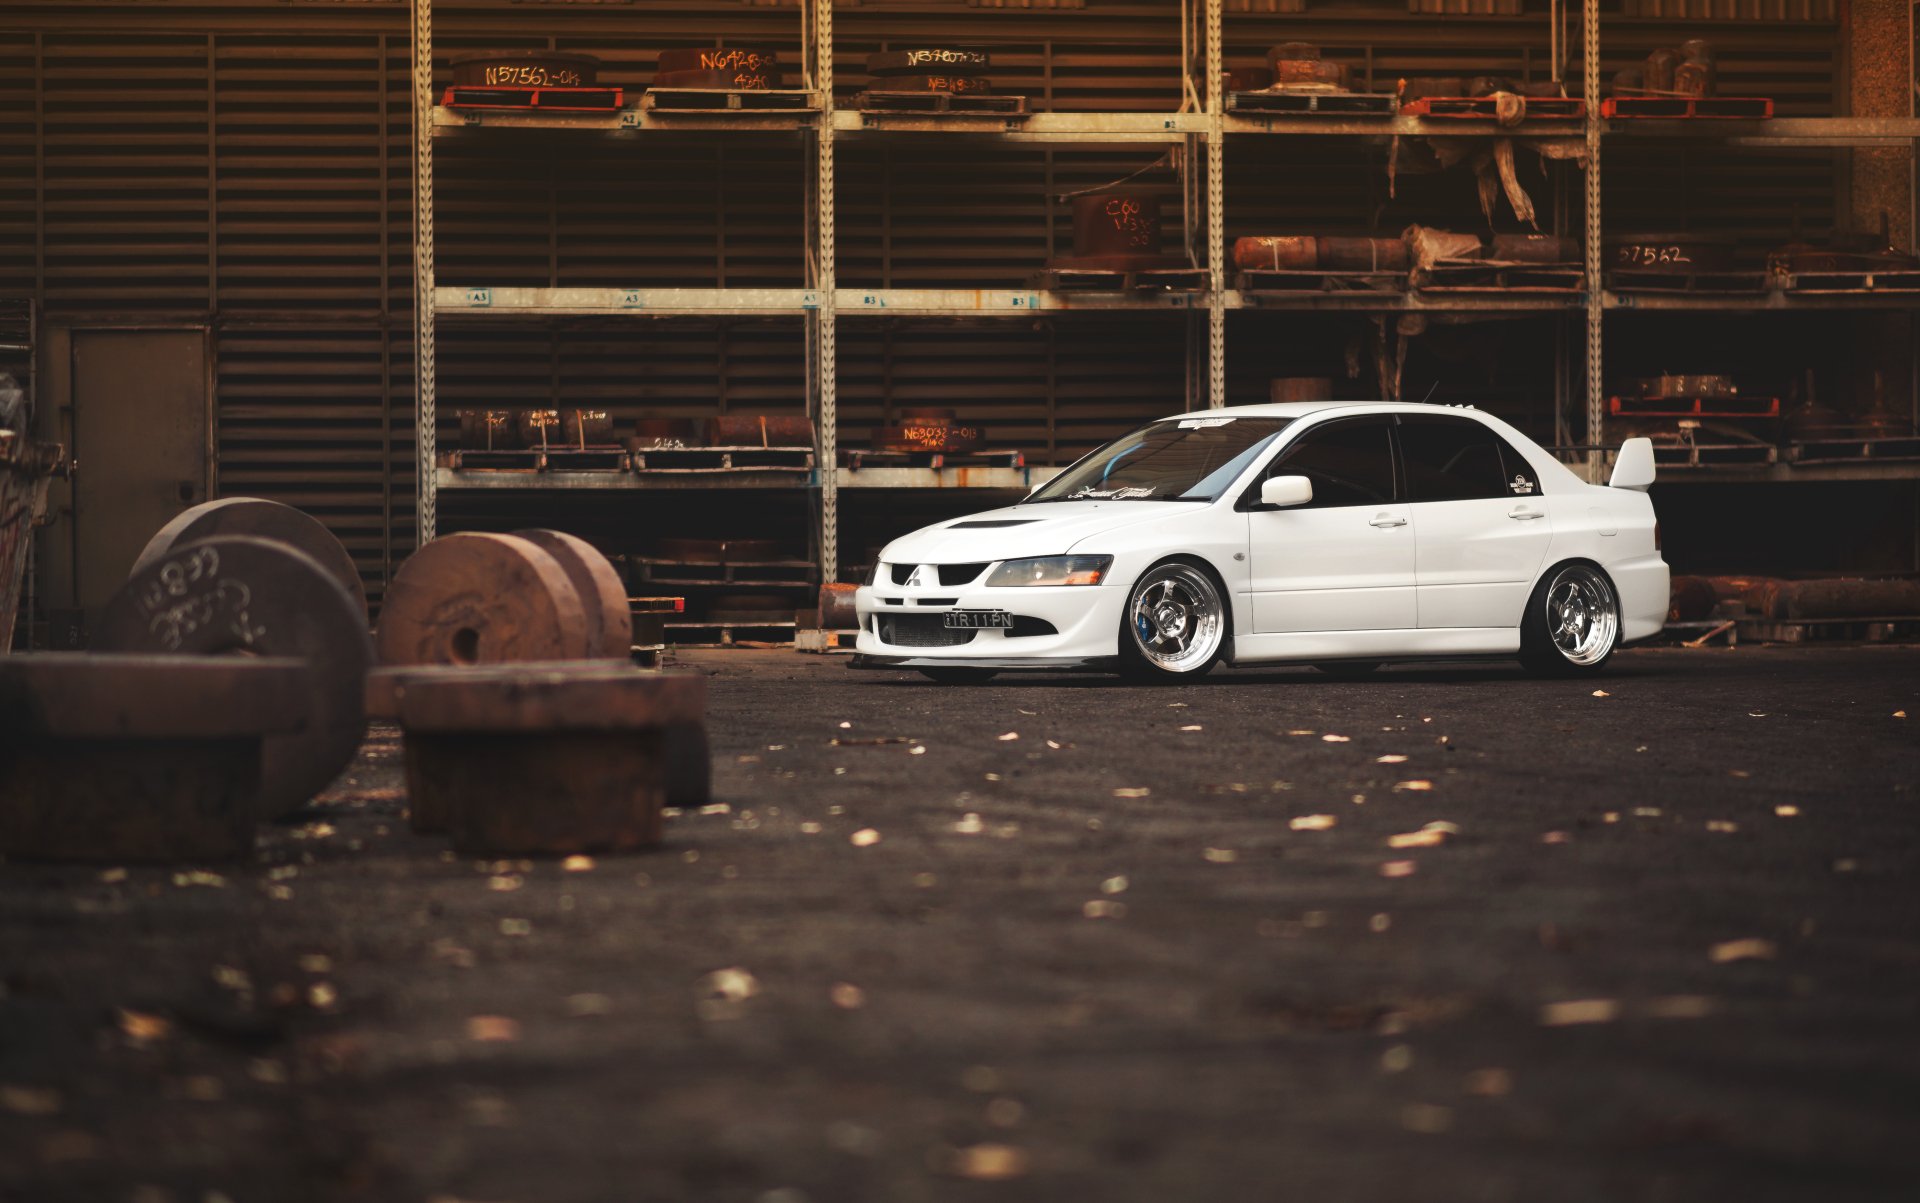 20+ Mitsubishi Evolution VIII HD Wallpapers and Backgrounds